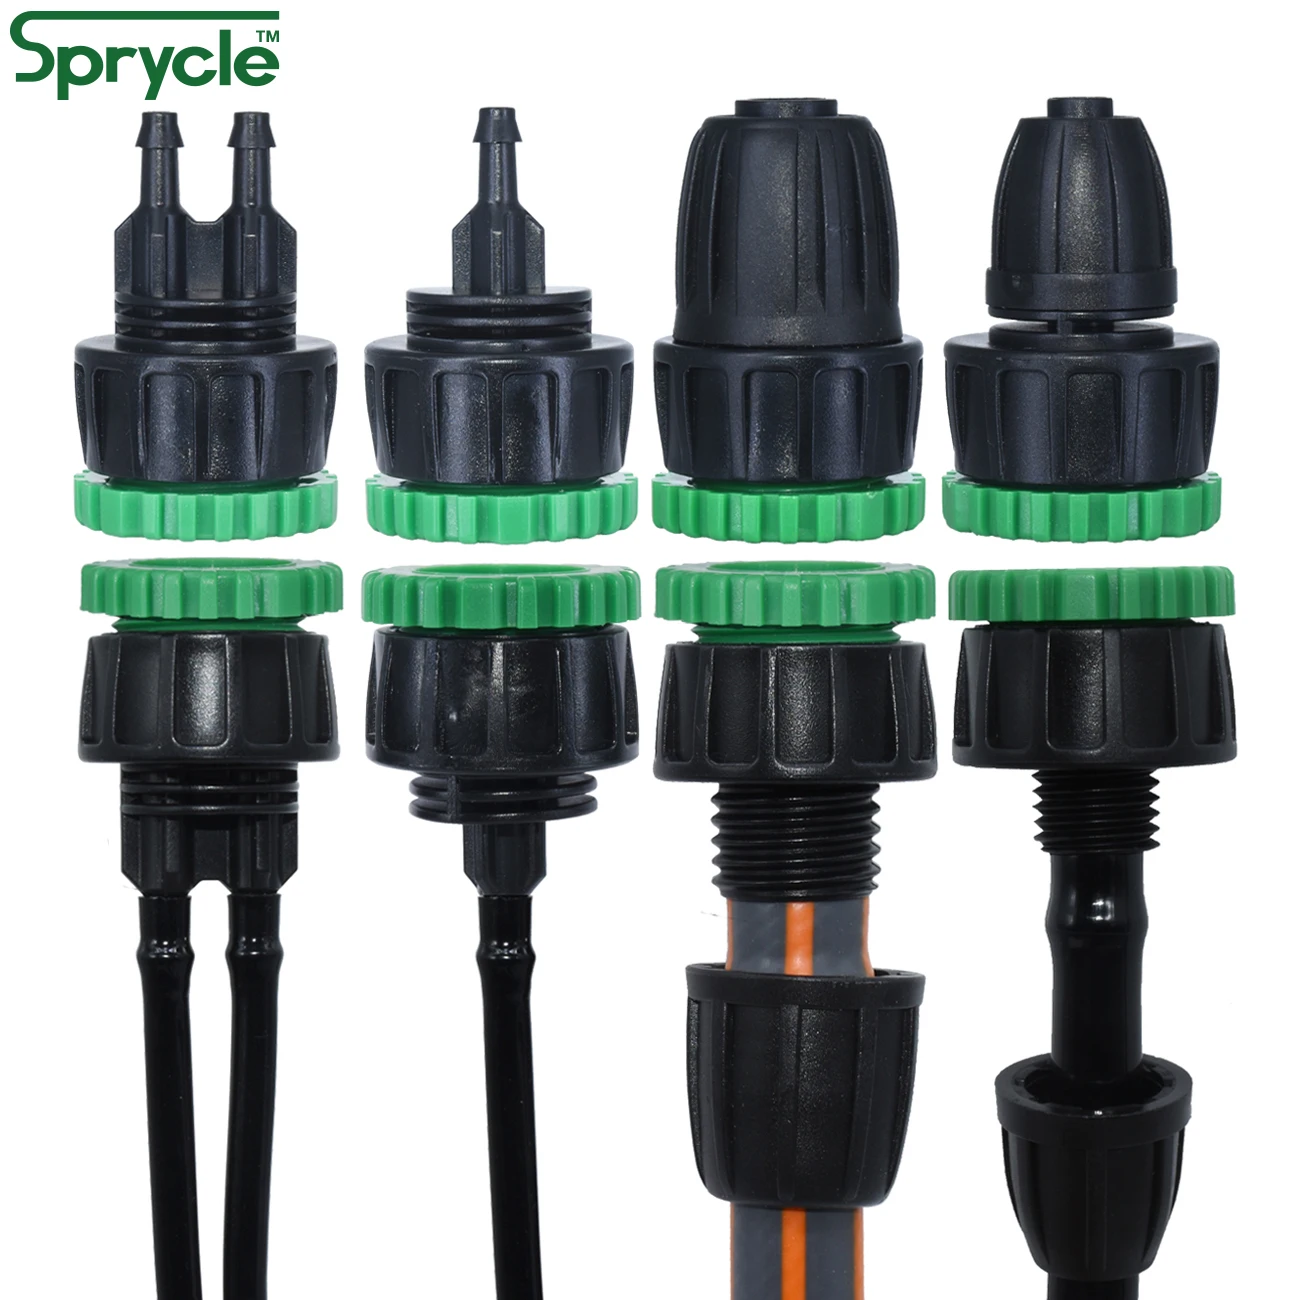 

SPRYCLE Garden Tap Adapter Splitter 1/2" 3/4" to 4/7mm 8/11mm 16mm Hose Connectors Female Drip Irrigation Watering Pipe Fitting